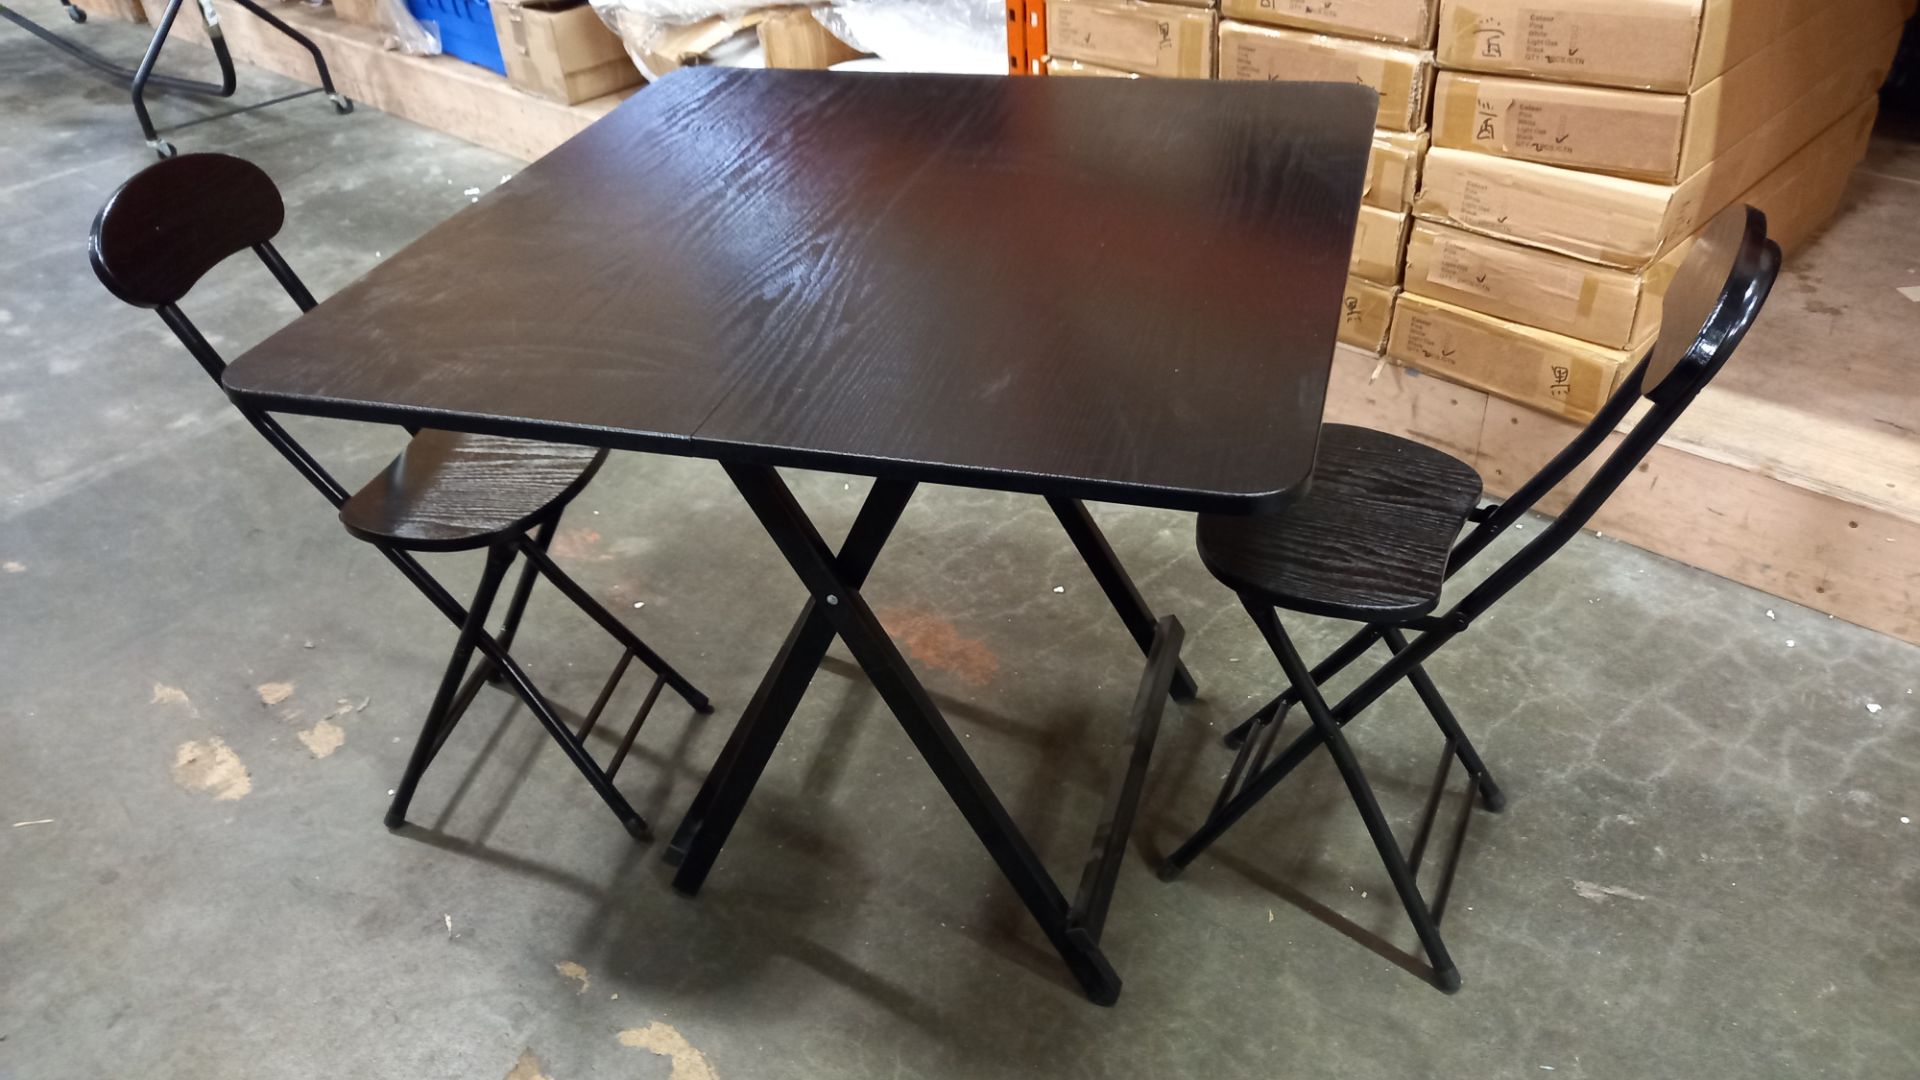 2 X BLACK COLOURED 80 X 80 CM SQUARE TABLES AND 4 X BLACK FOLDABLE CHAIRS (GRADED GOOD